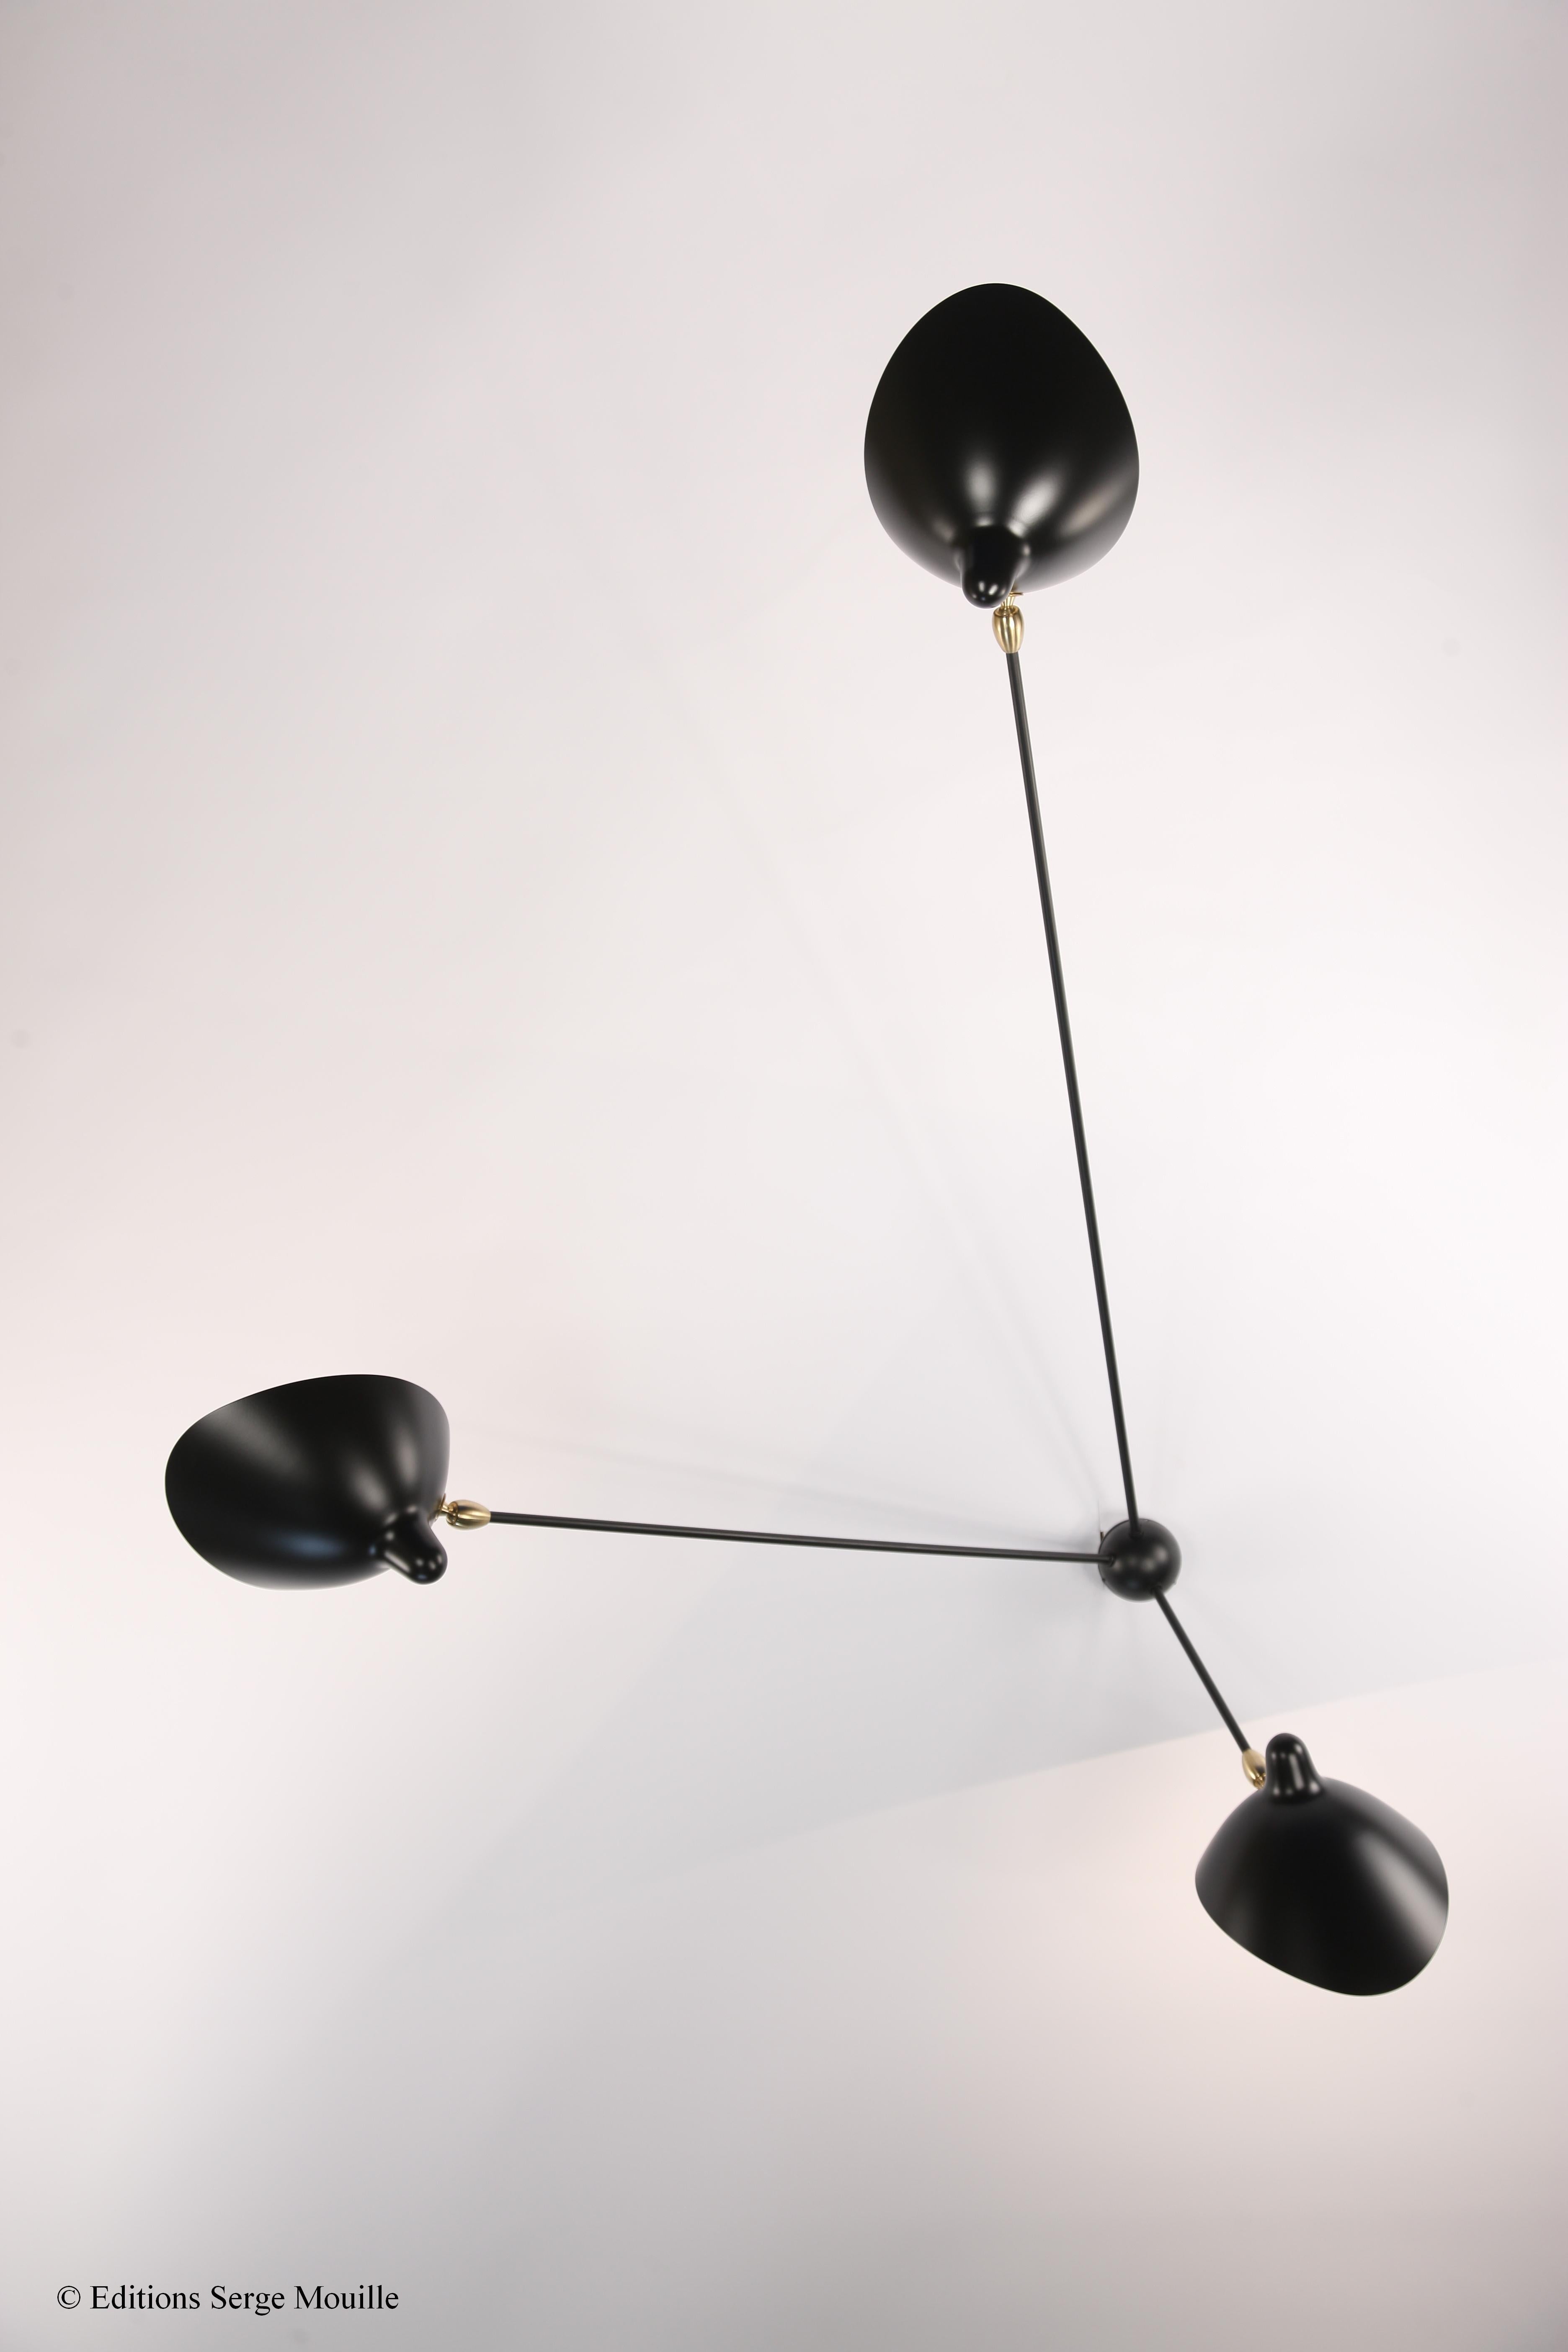 Sconce spider 3 still Arms by Serge Mouille
Dimensions: D120 x W80 x H145 cm
Materials: Brass, steel, aluminium
One of a King. Numbered.
Also available in different colour. 

All our lamps can be wired according to each country. If sold to the